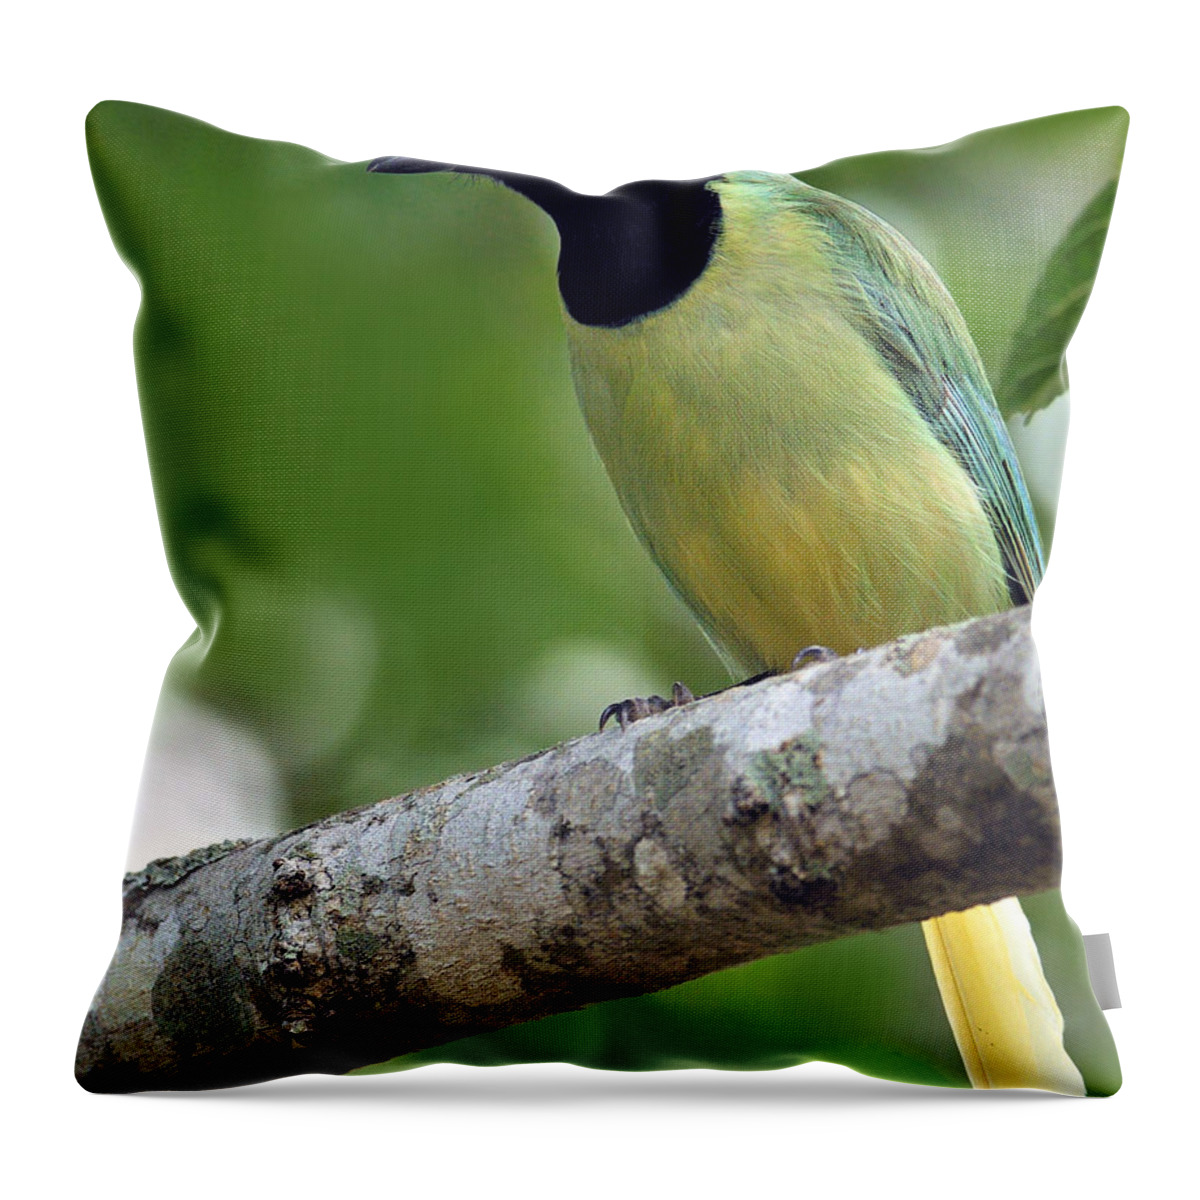 Green Jay Throw Pillow featuring the photograph Green Jay by Tony Beck